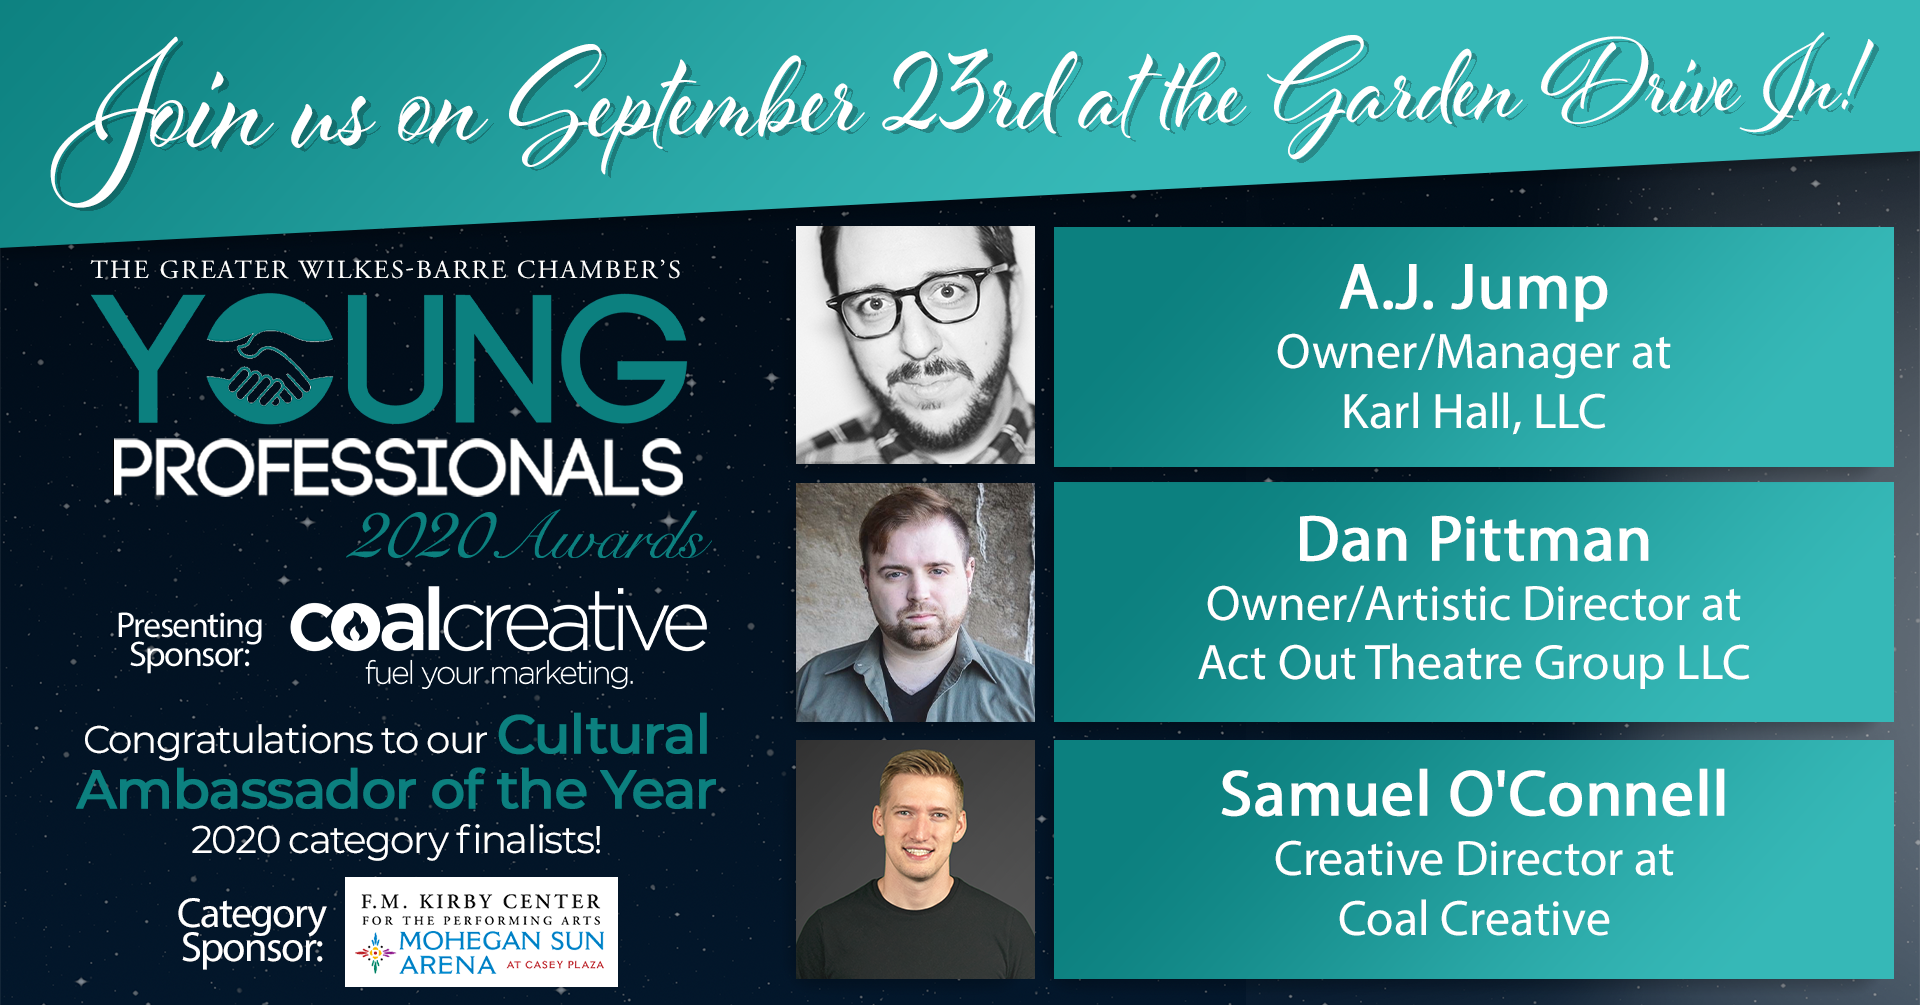 Meet the 2020 Young Professionals Category Finalists for Cultural Ambassador of the Year!